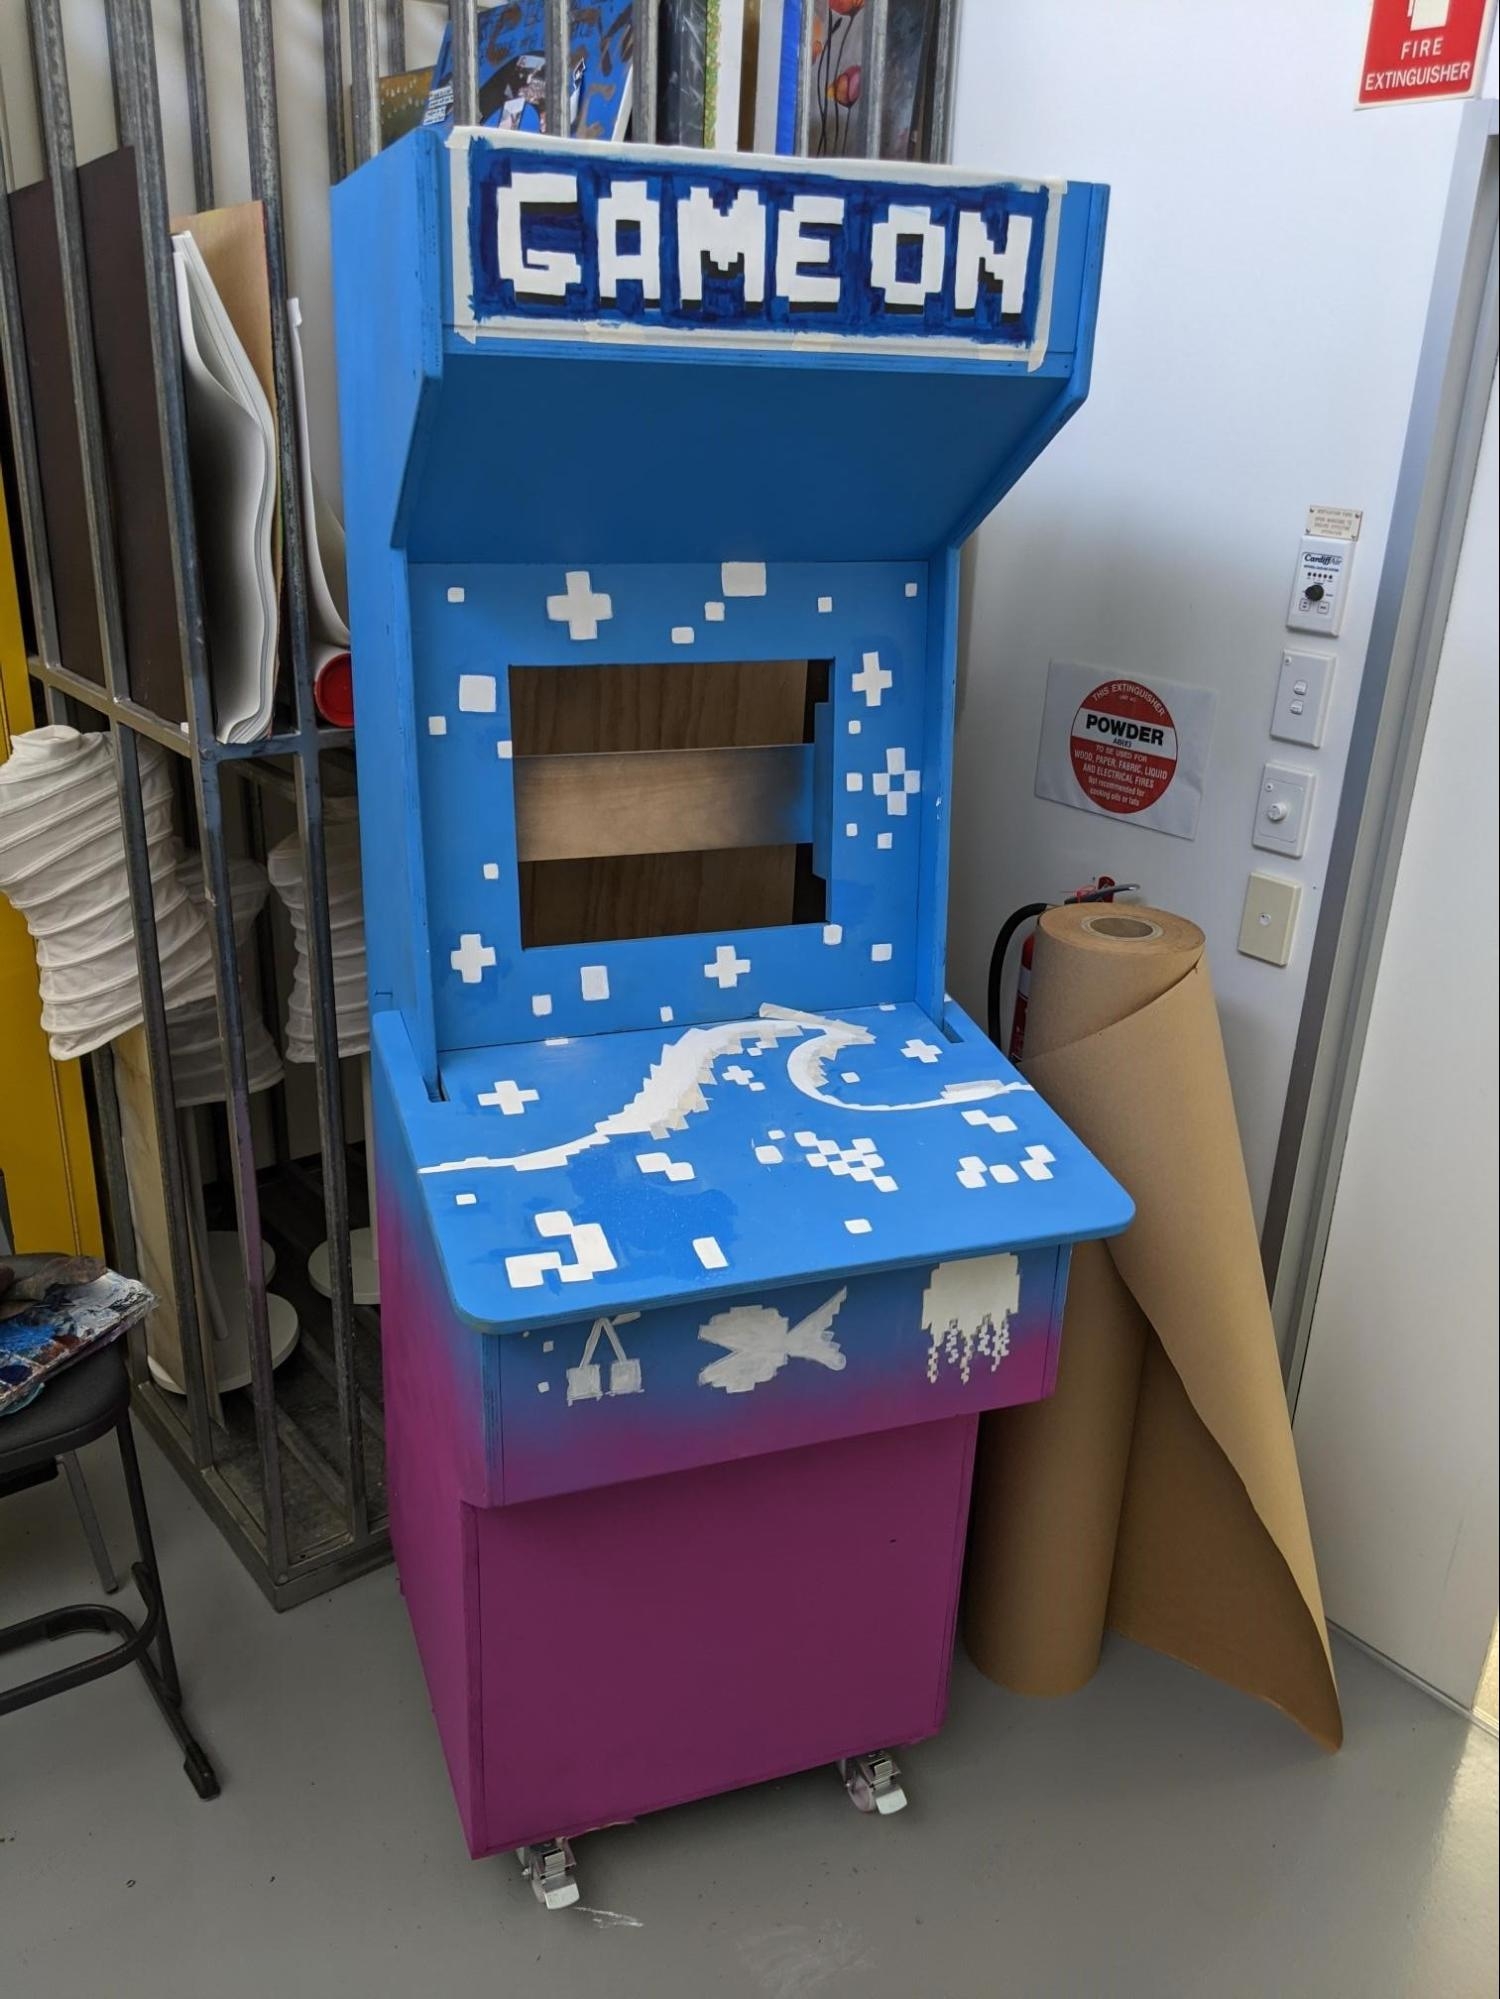 A new look for the arcade machine, some details and 'Game on' written on top